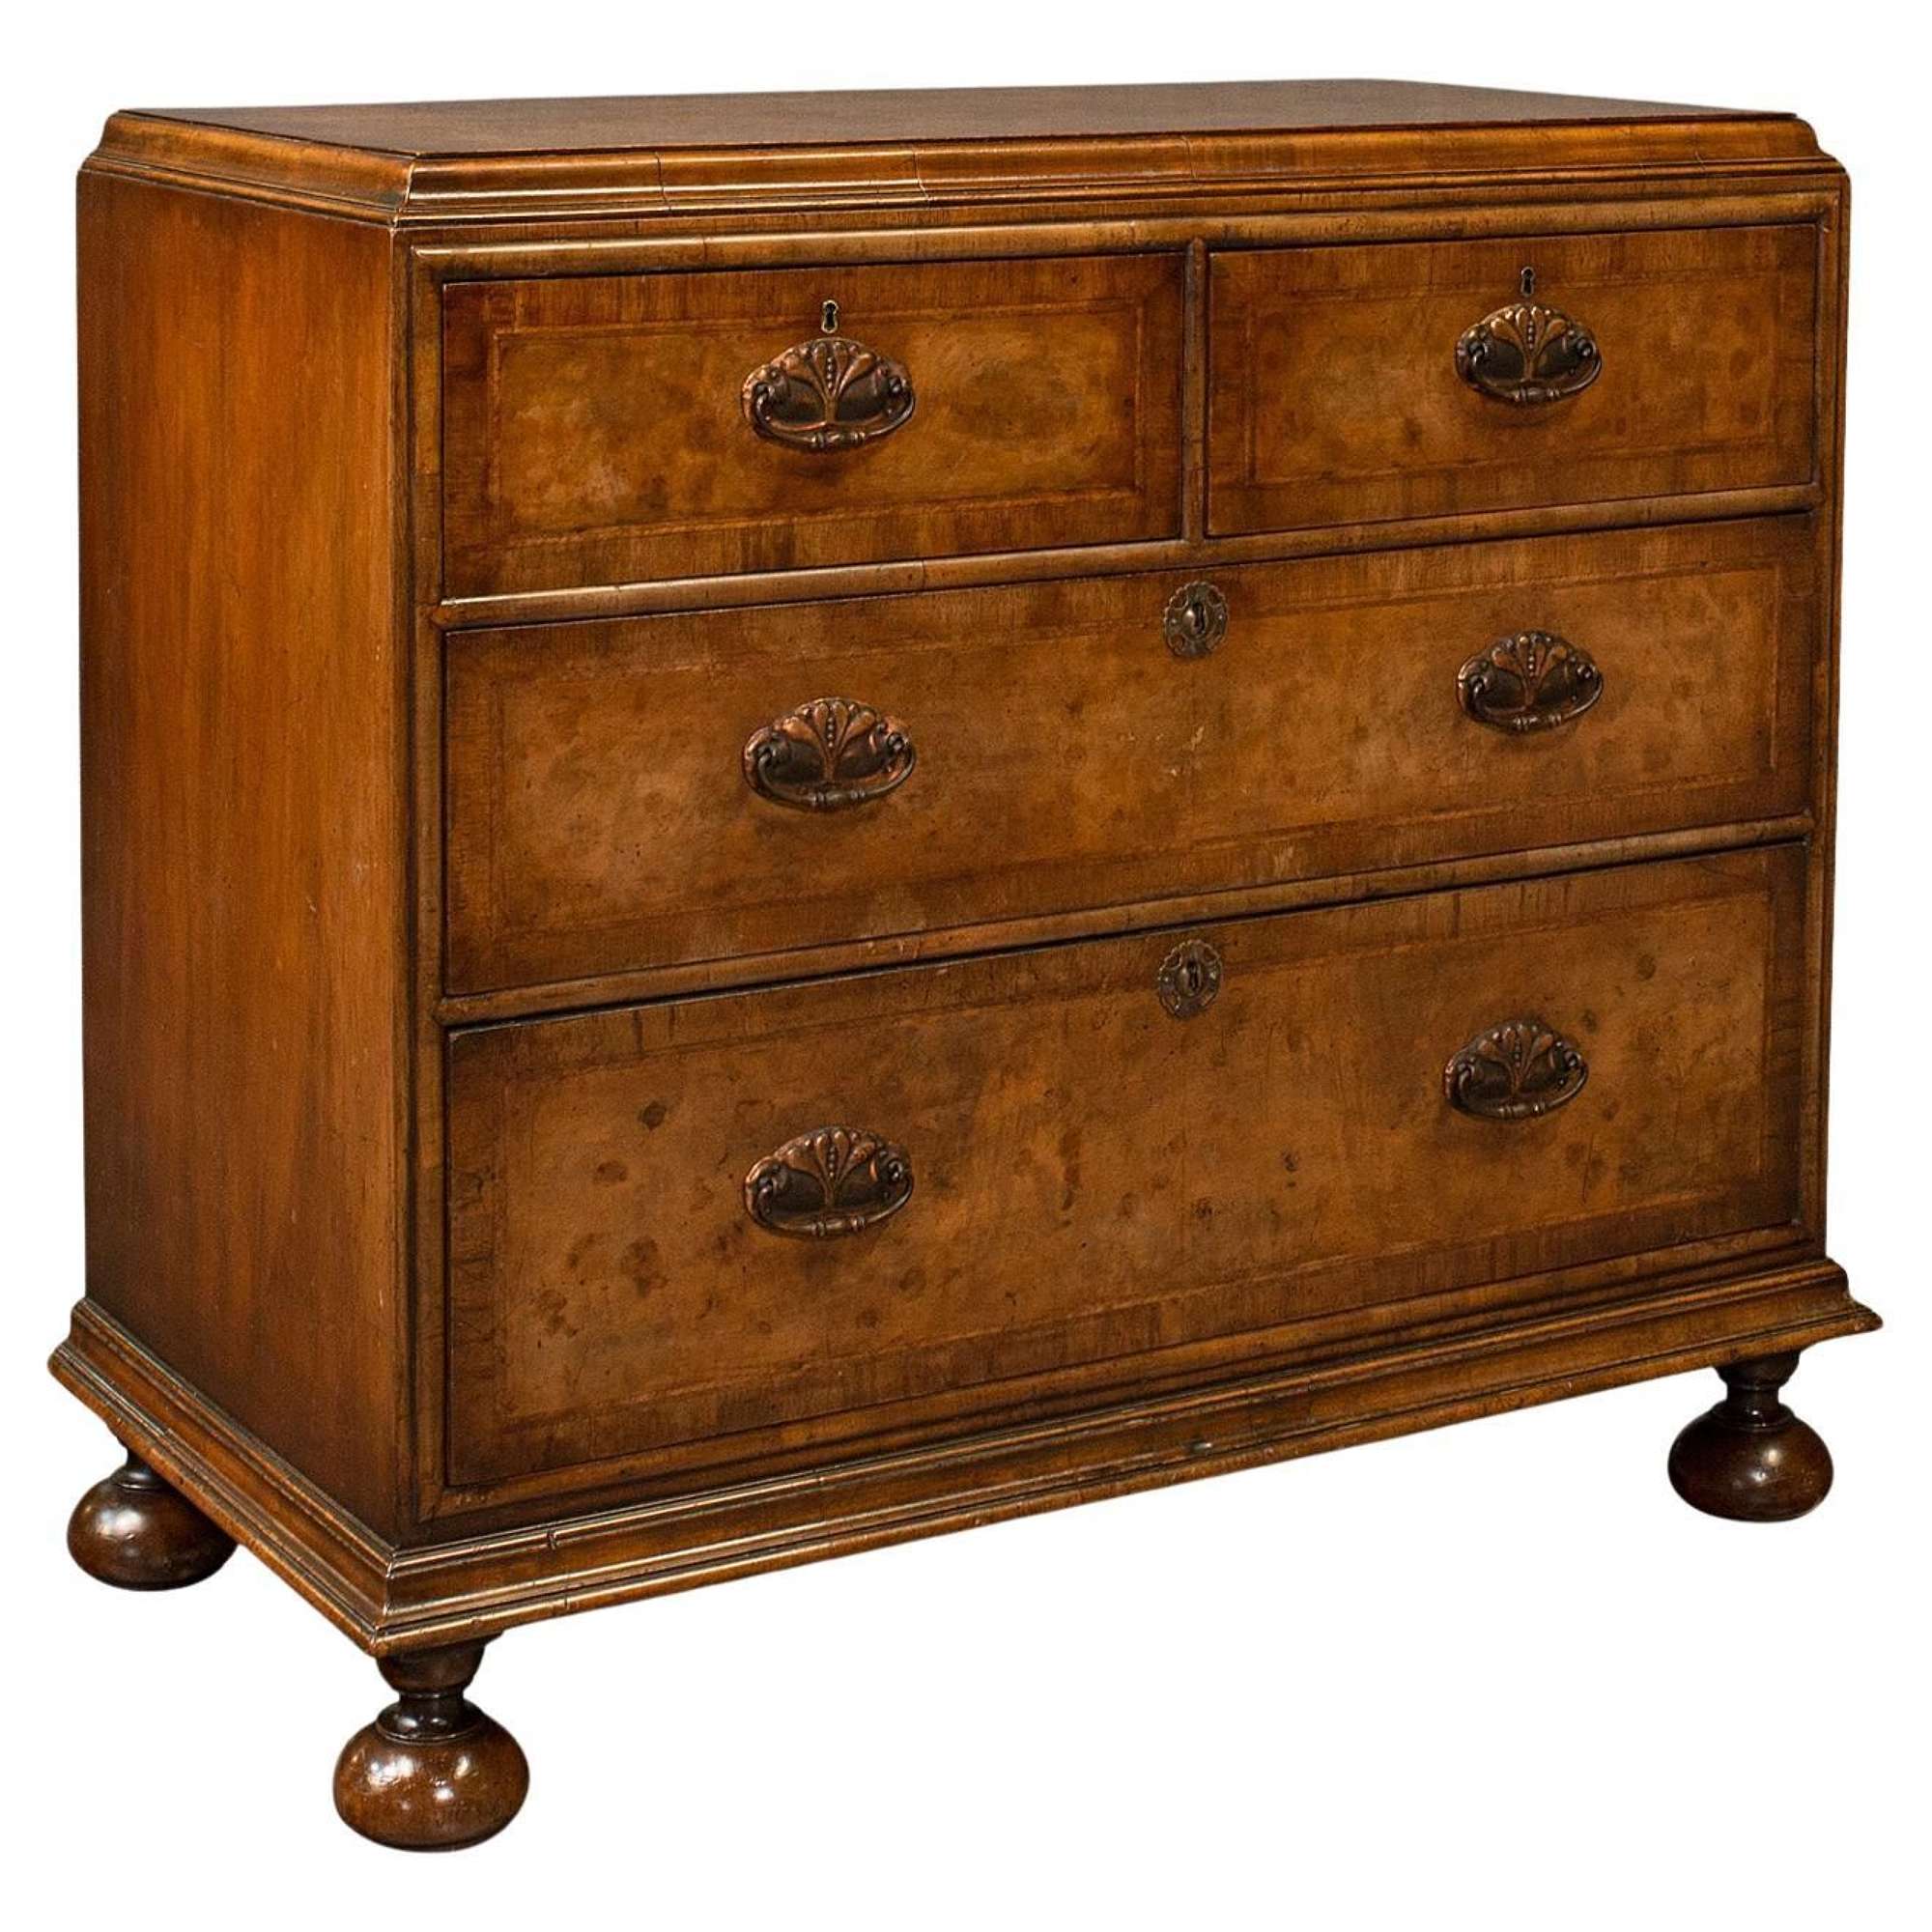 Antique Chest Of Drawers, English, Walnut, Bedroom, Georgian Revival, Victorian